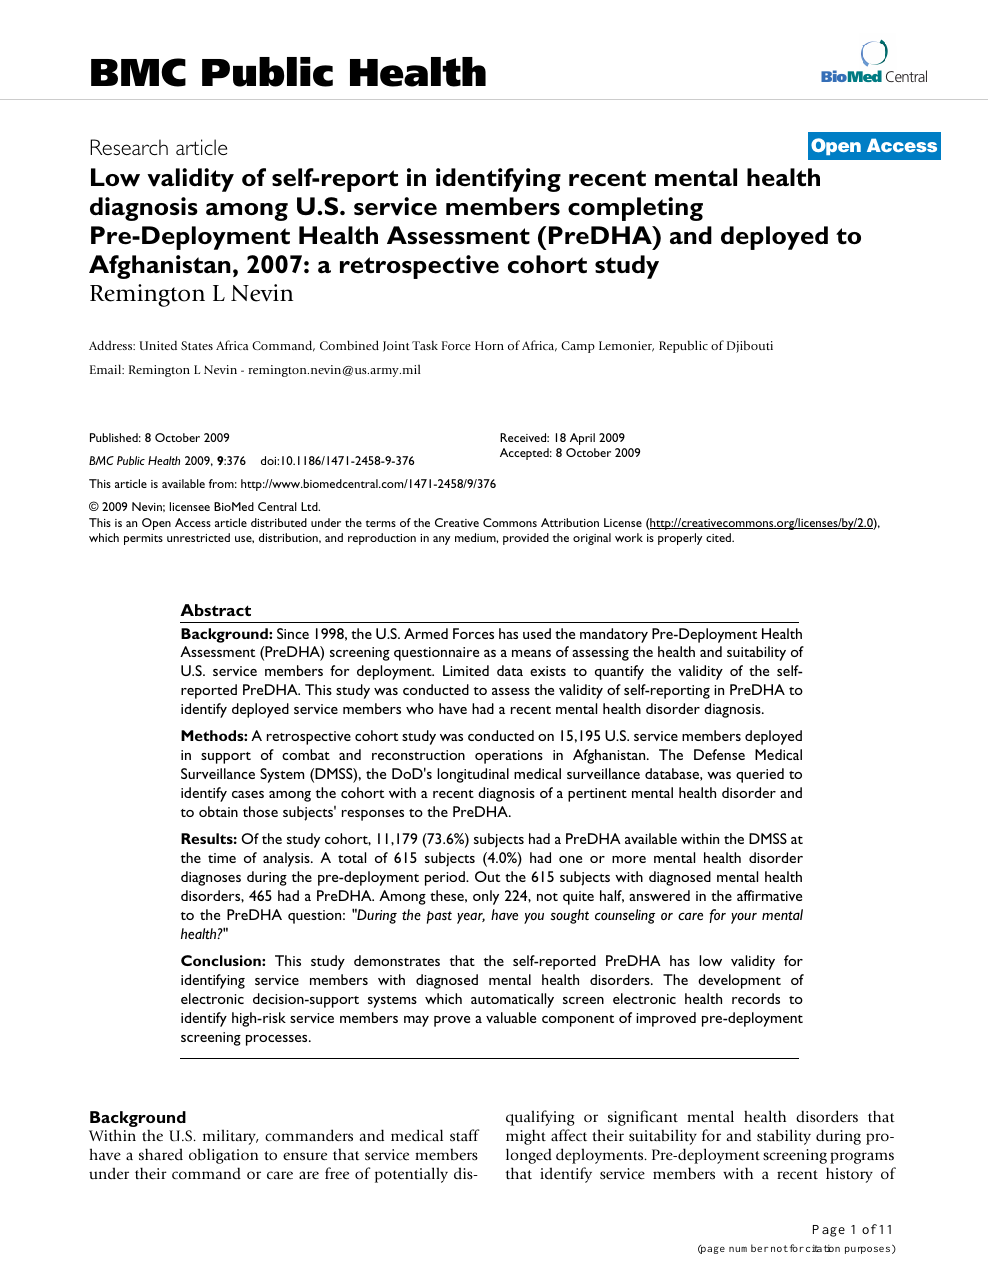 Low Validity Of Self Report In Identifying Recent Mental Health Diagnosis Among U S Service Members Completing Pre Deployment Health Assessment Predha And Deployed To Afghanistan 07 A Retrospective Cohort Study Topic Of Research